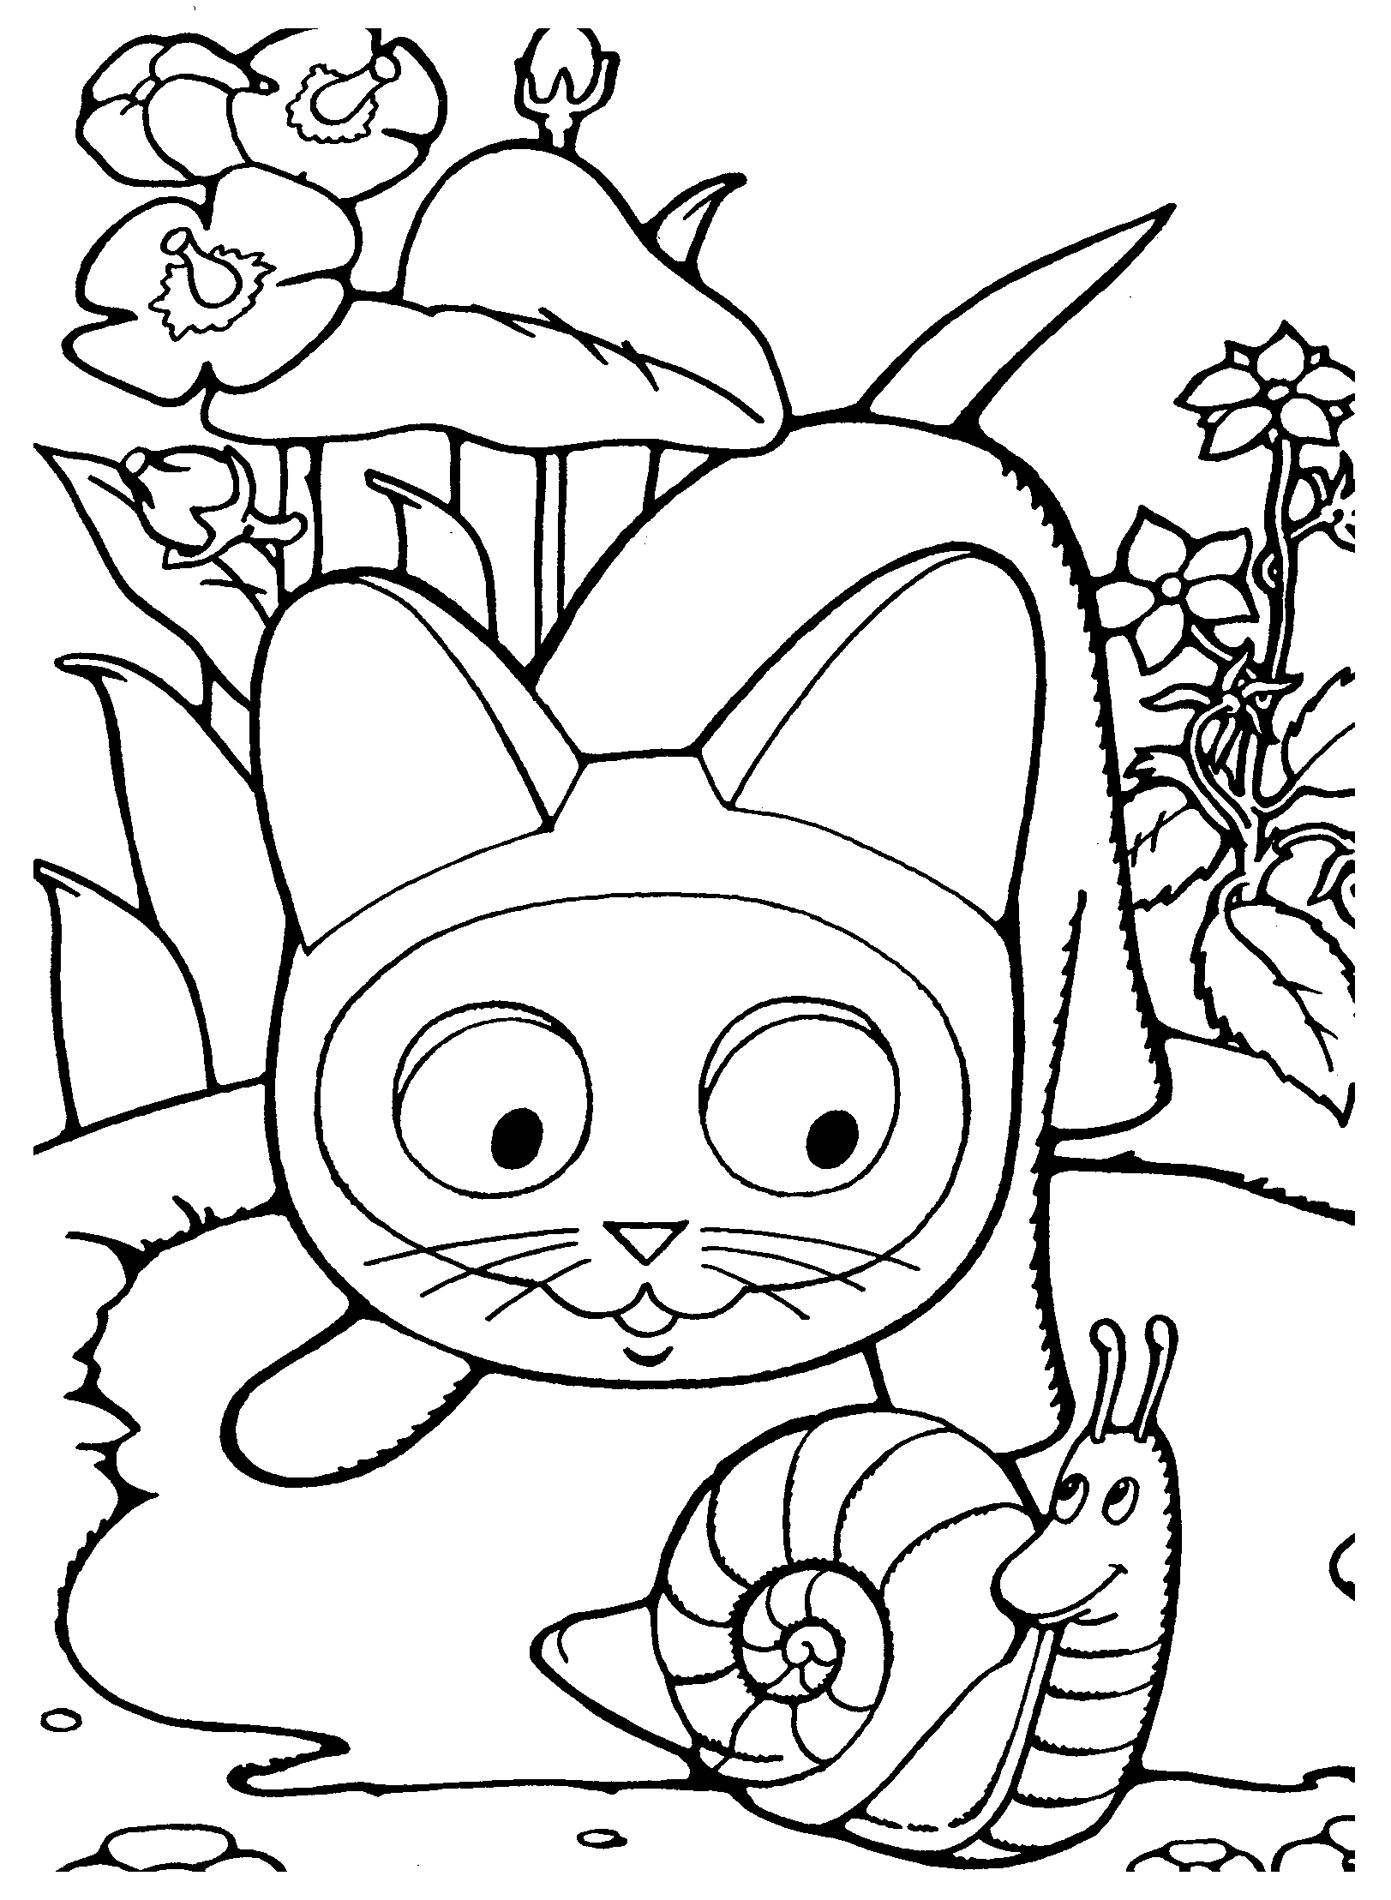 Coloring Drawing cat for hunting a snail. Category Pets allowed. Tags:  cat, cat.